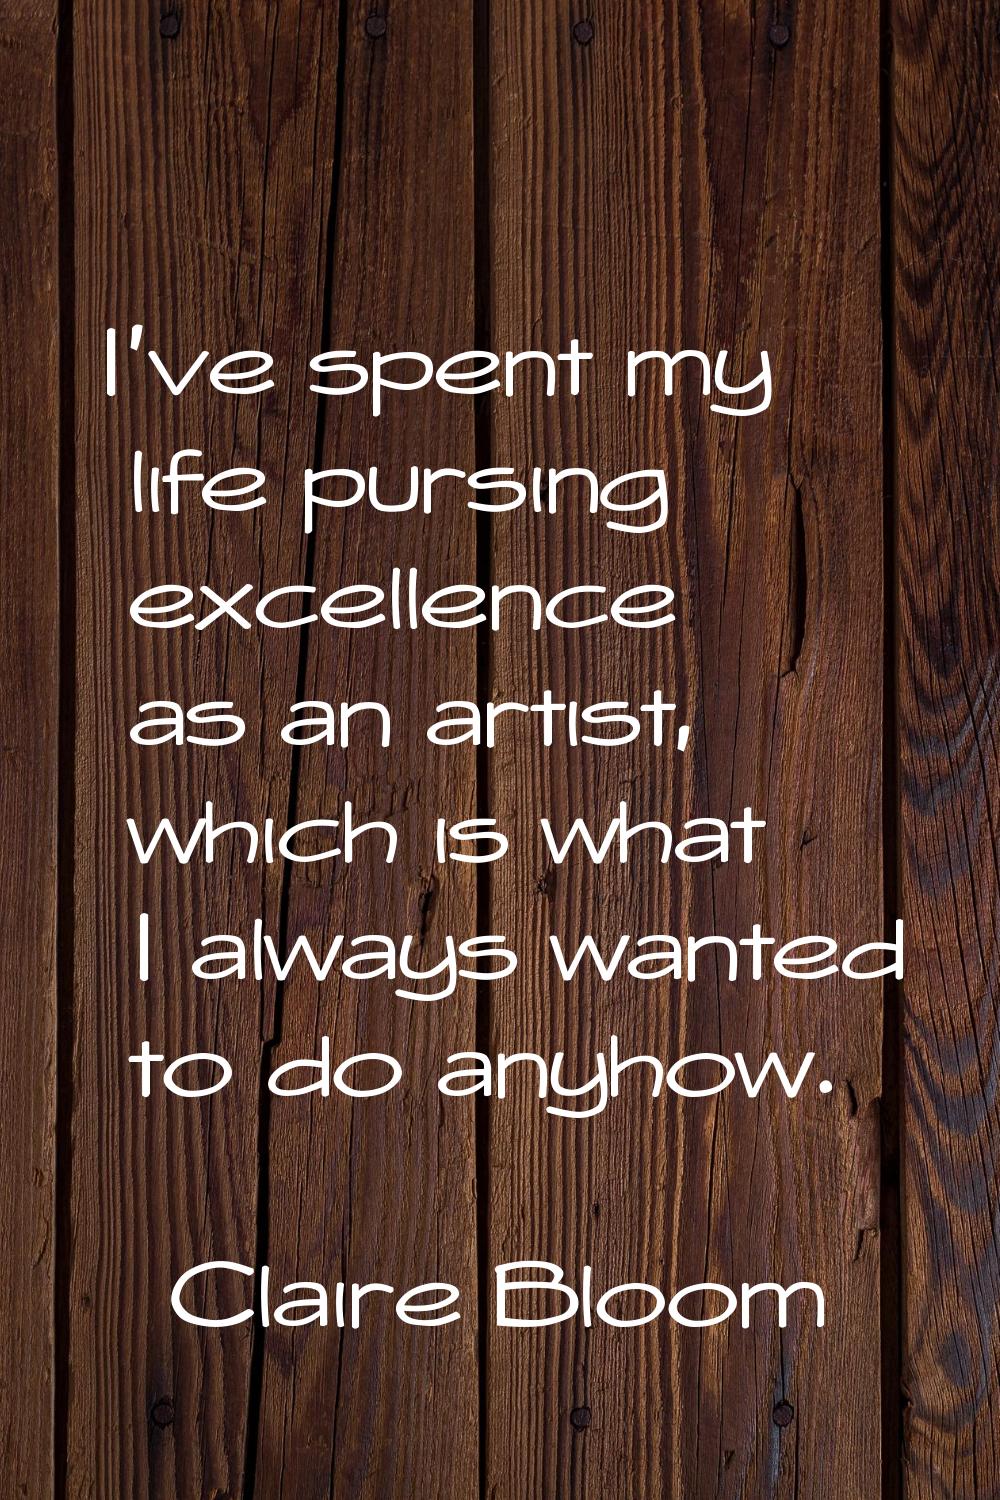 I've spent my life pursing excellence as an artist, which is what I always wanted to do anyhow.